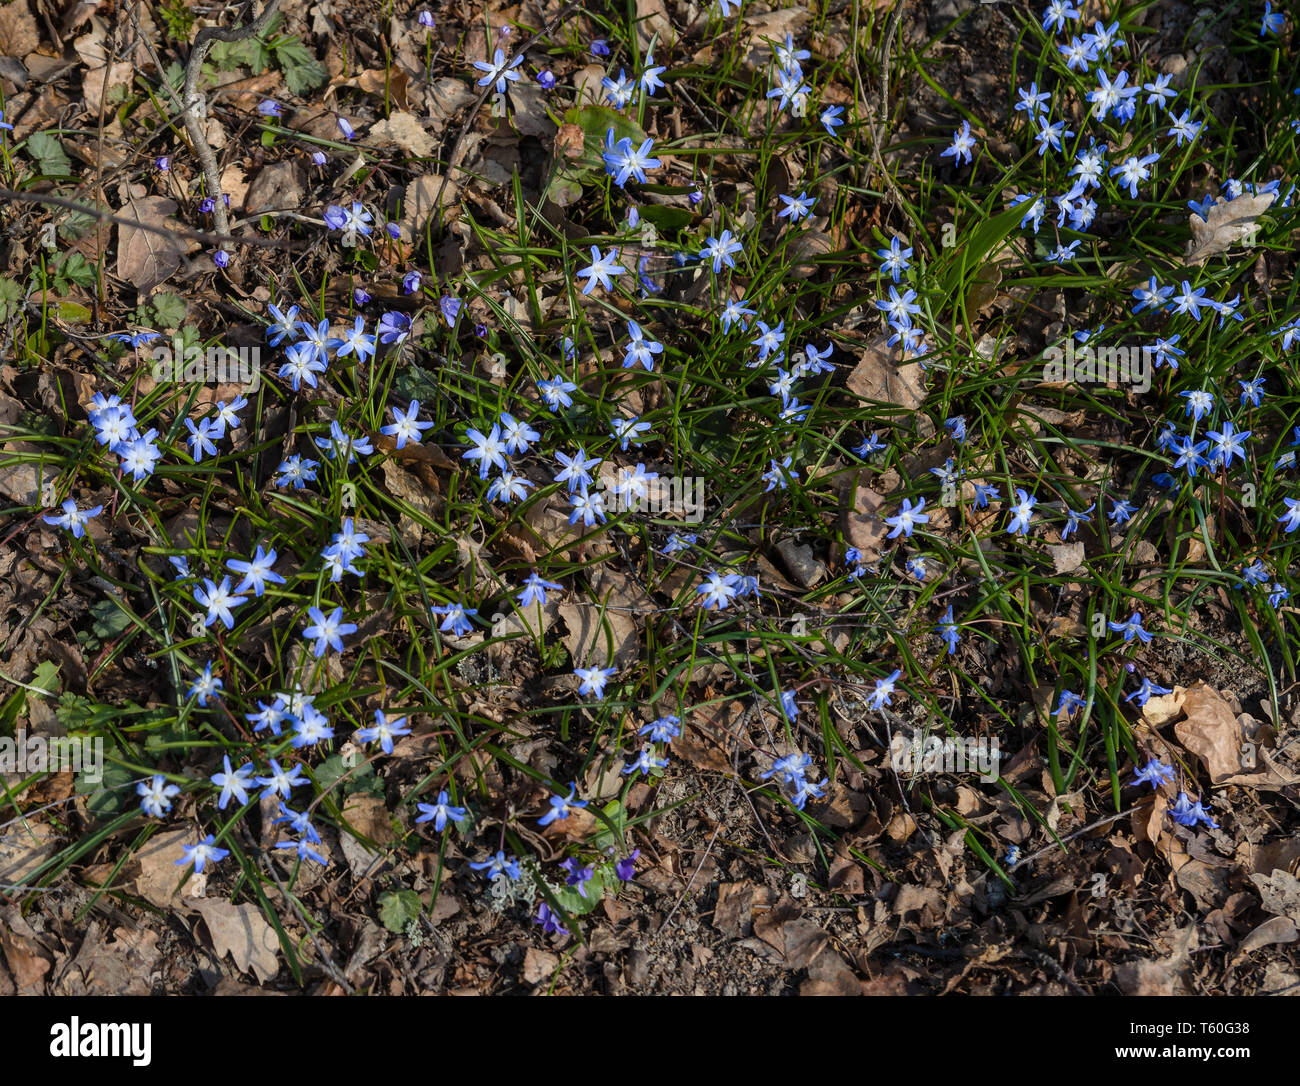 The bifolia shines blue among the dry leaves. Stock Photo